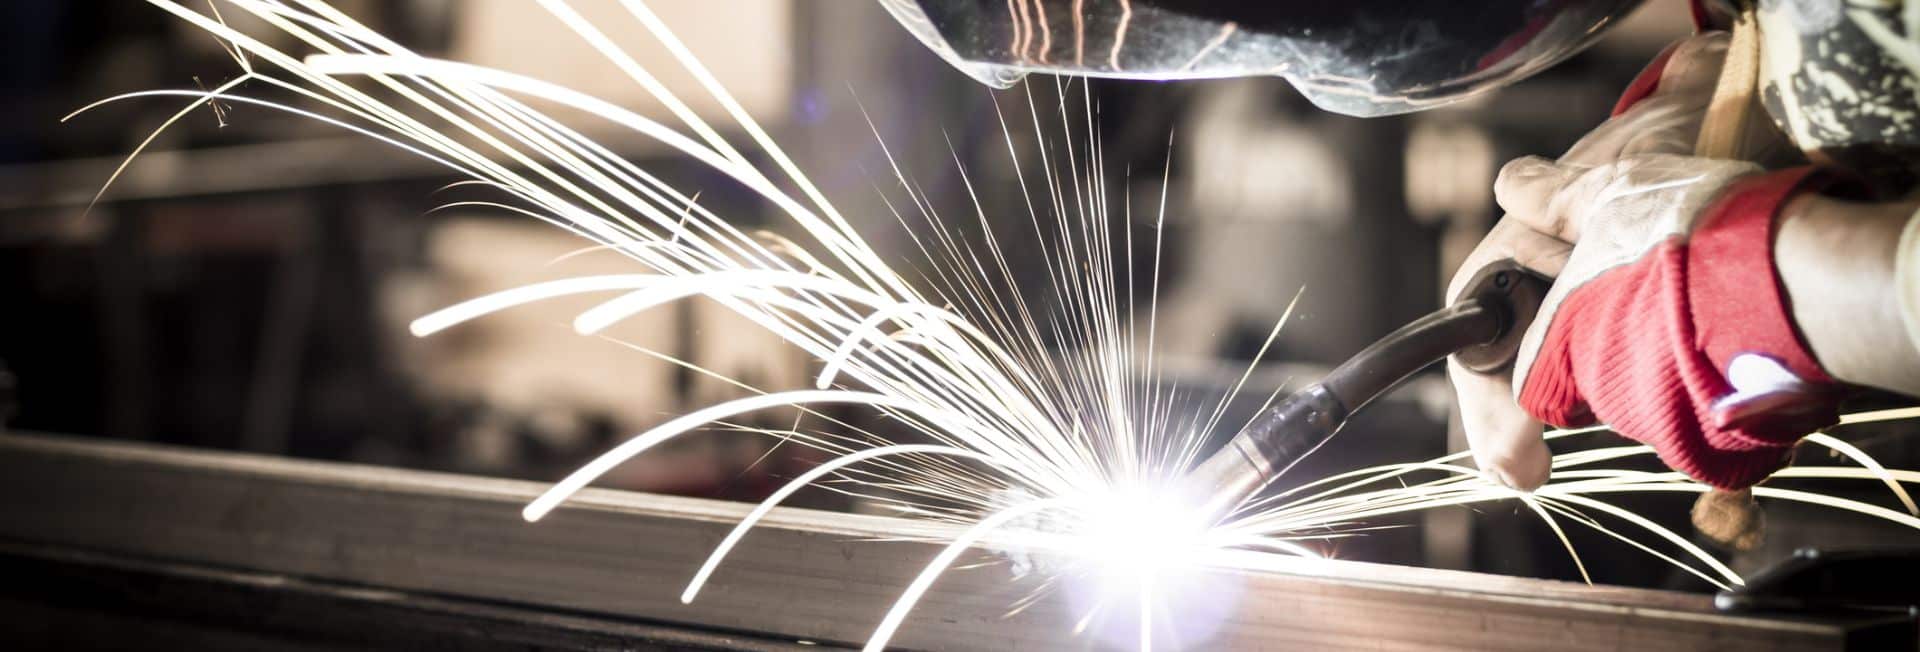 sparks-to-skills-welding-education